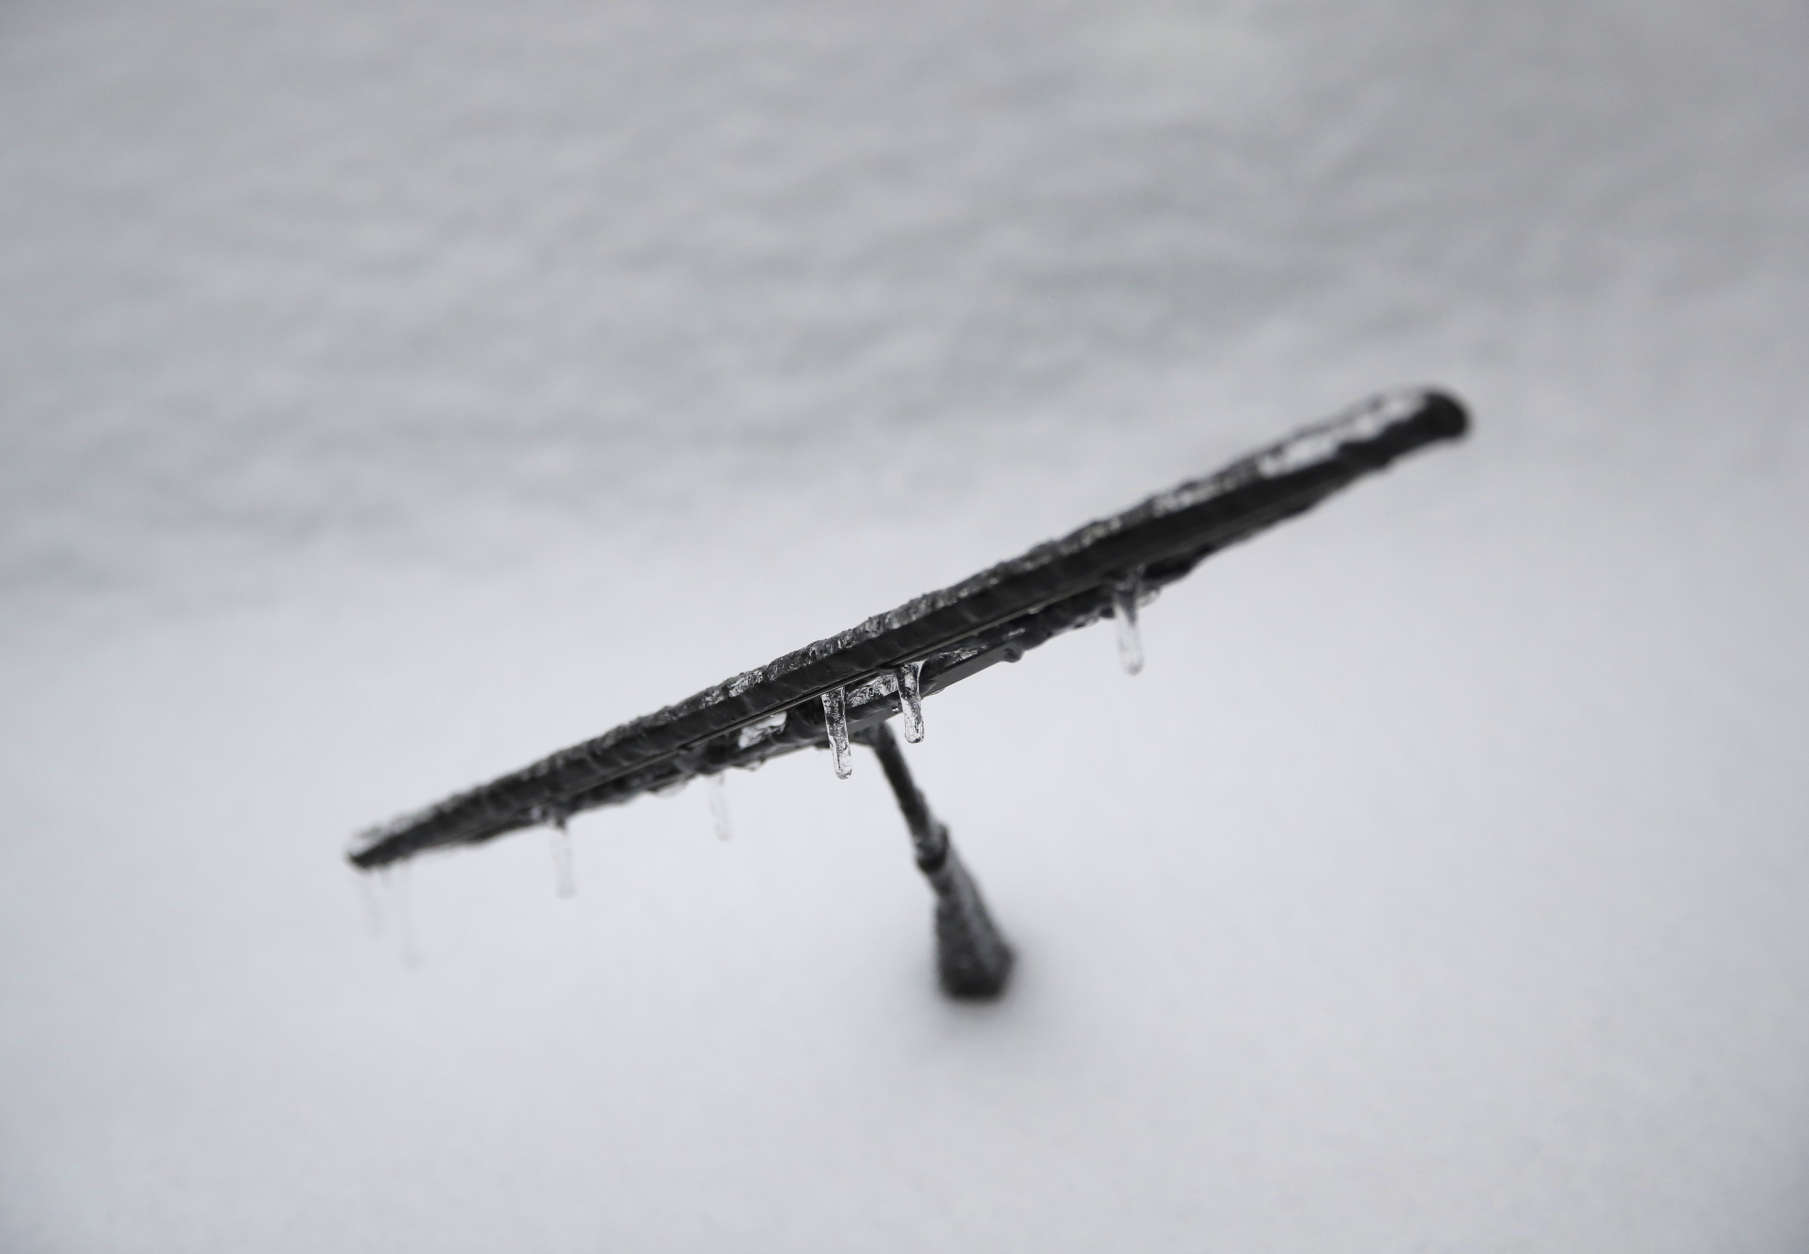 Ice sticks to a windshield wiper that was propped up overnight in advance of a winter storm moving through Baltimore, Tuesday, March 14, 2017. (AP Photo/Patrick Semansky)